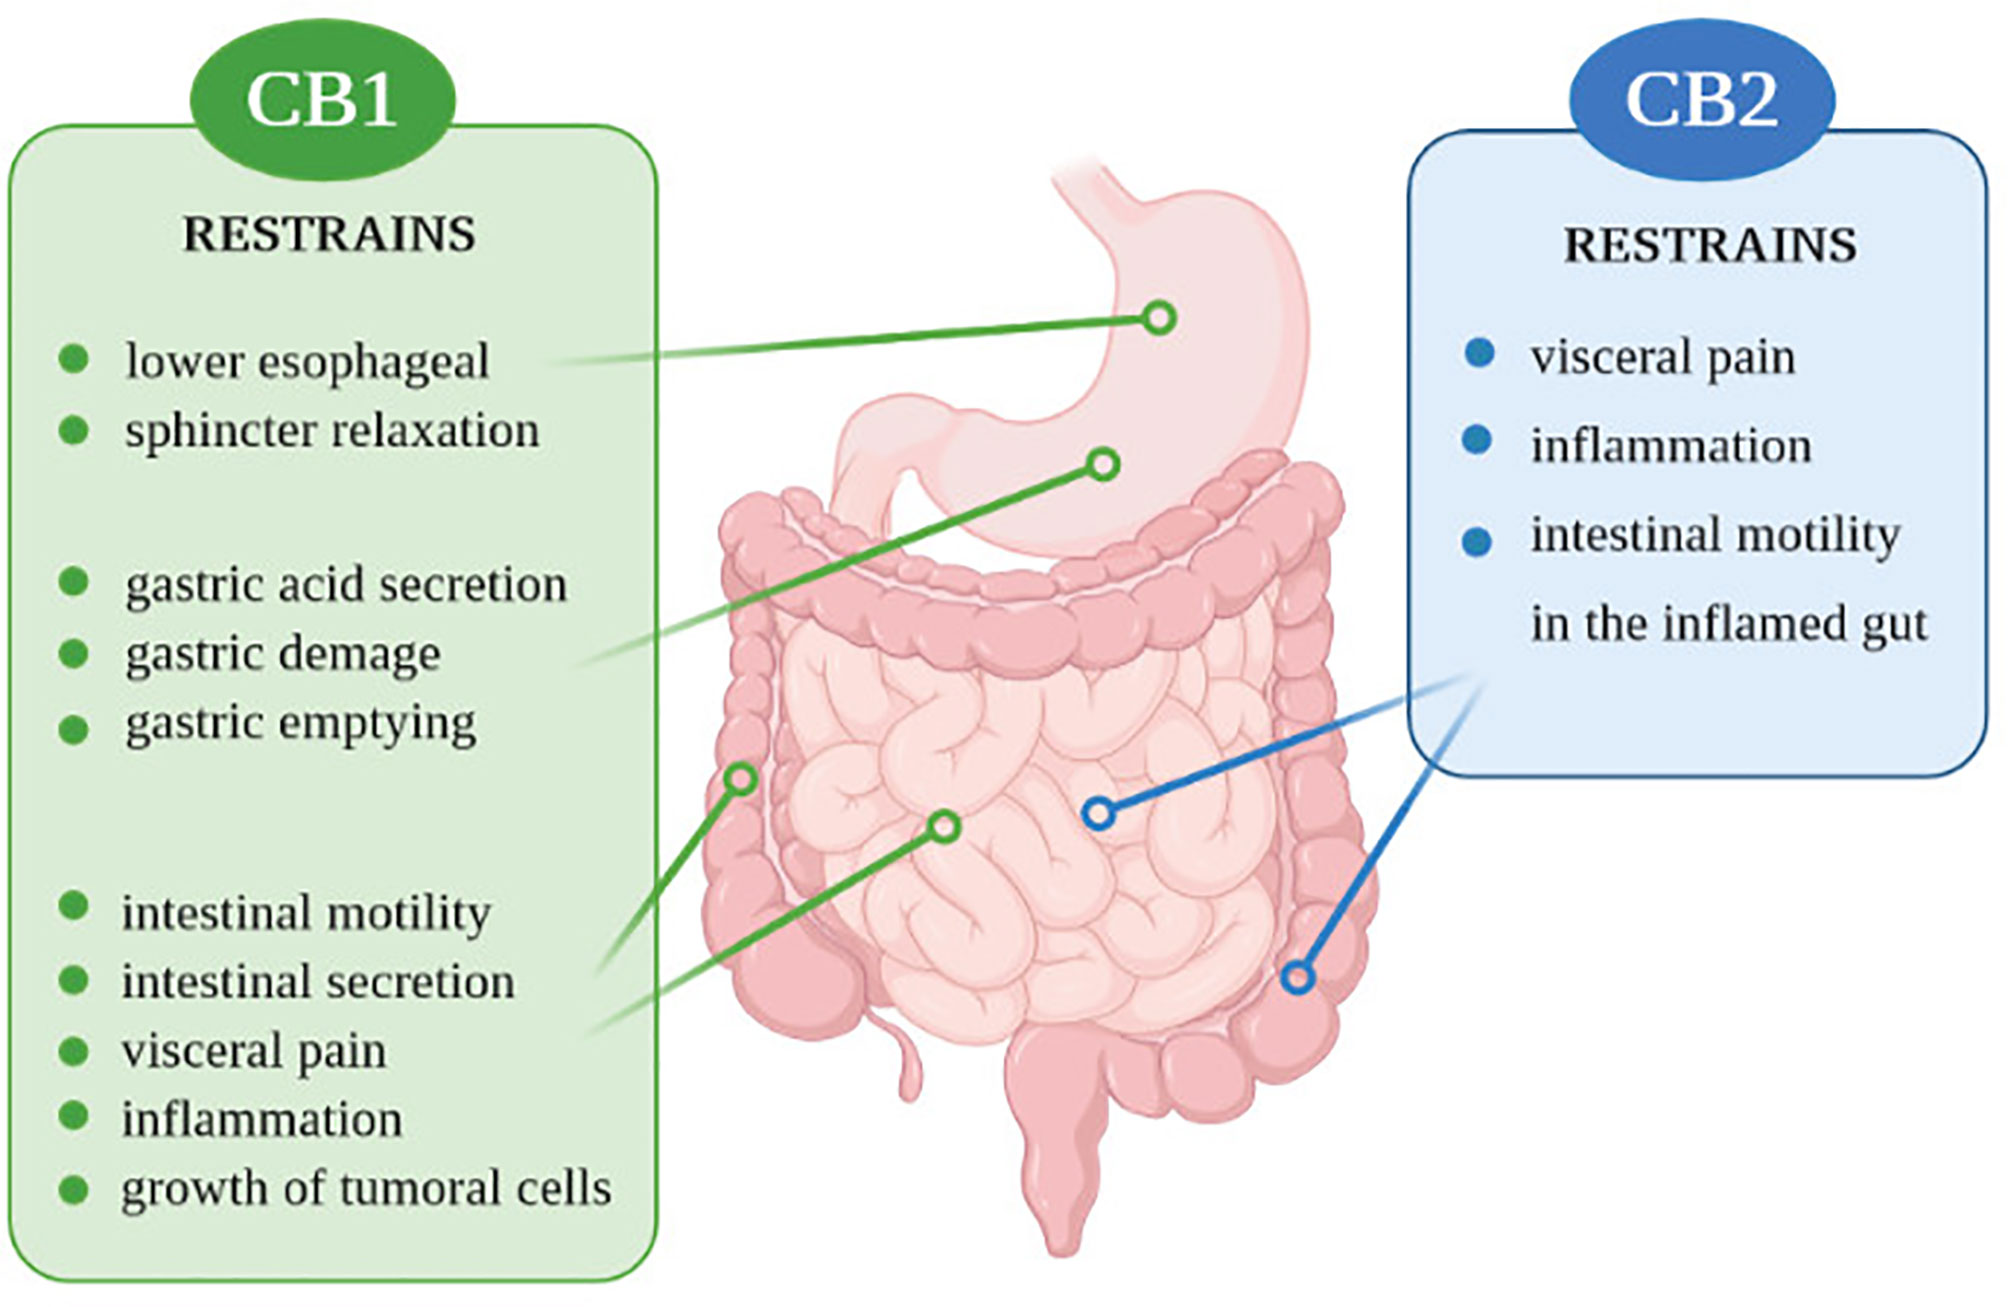 Colon перевод. A diagram of the endocannabinoid System, showing the receptors and endocannabinoids involved..